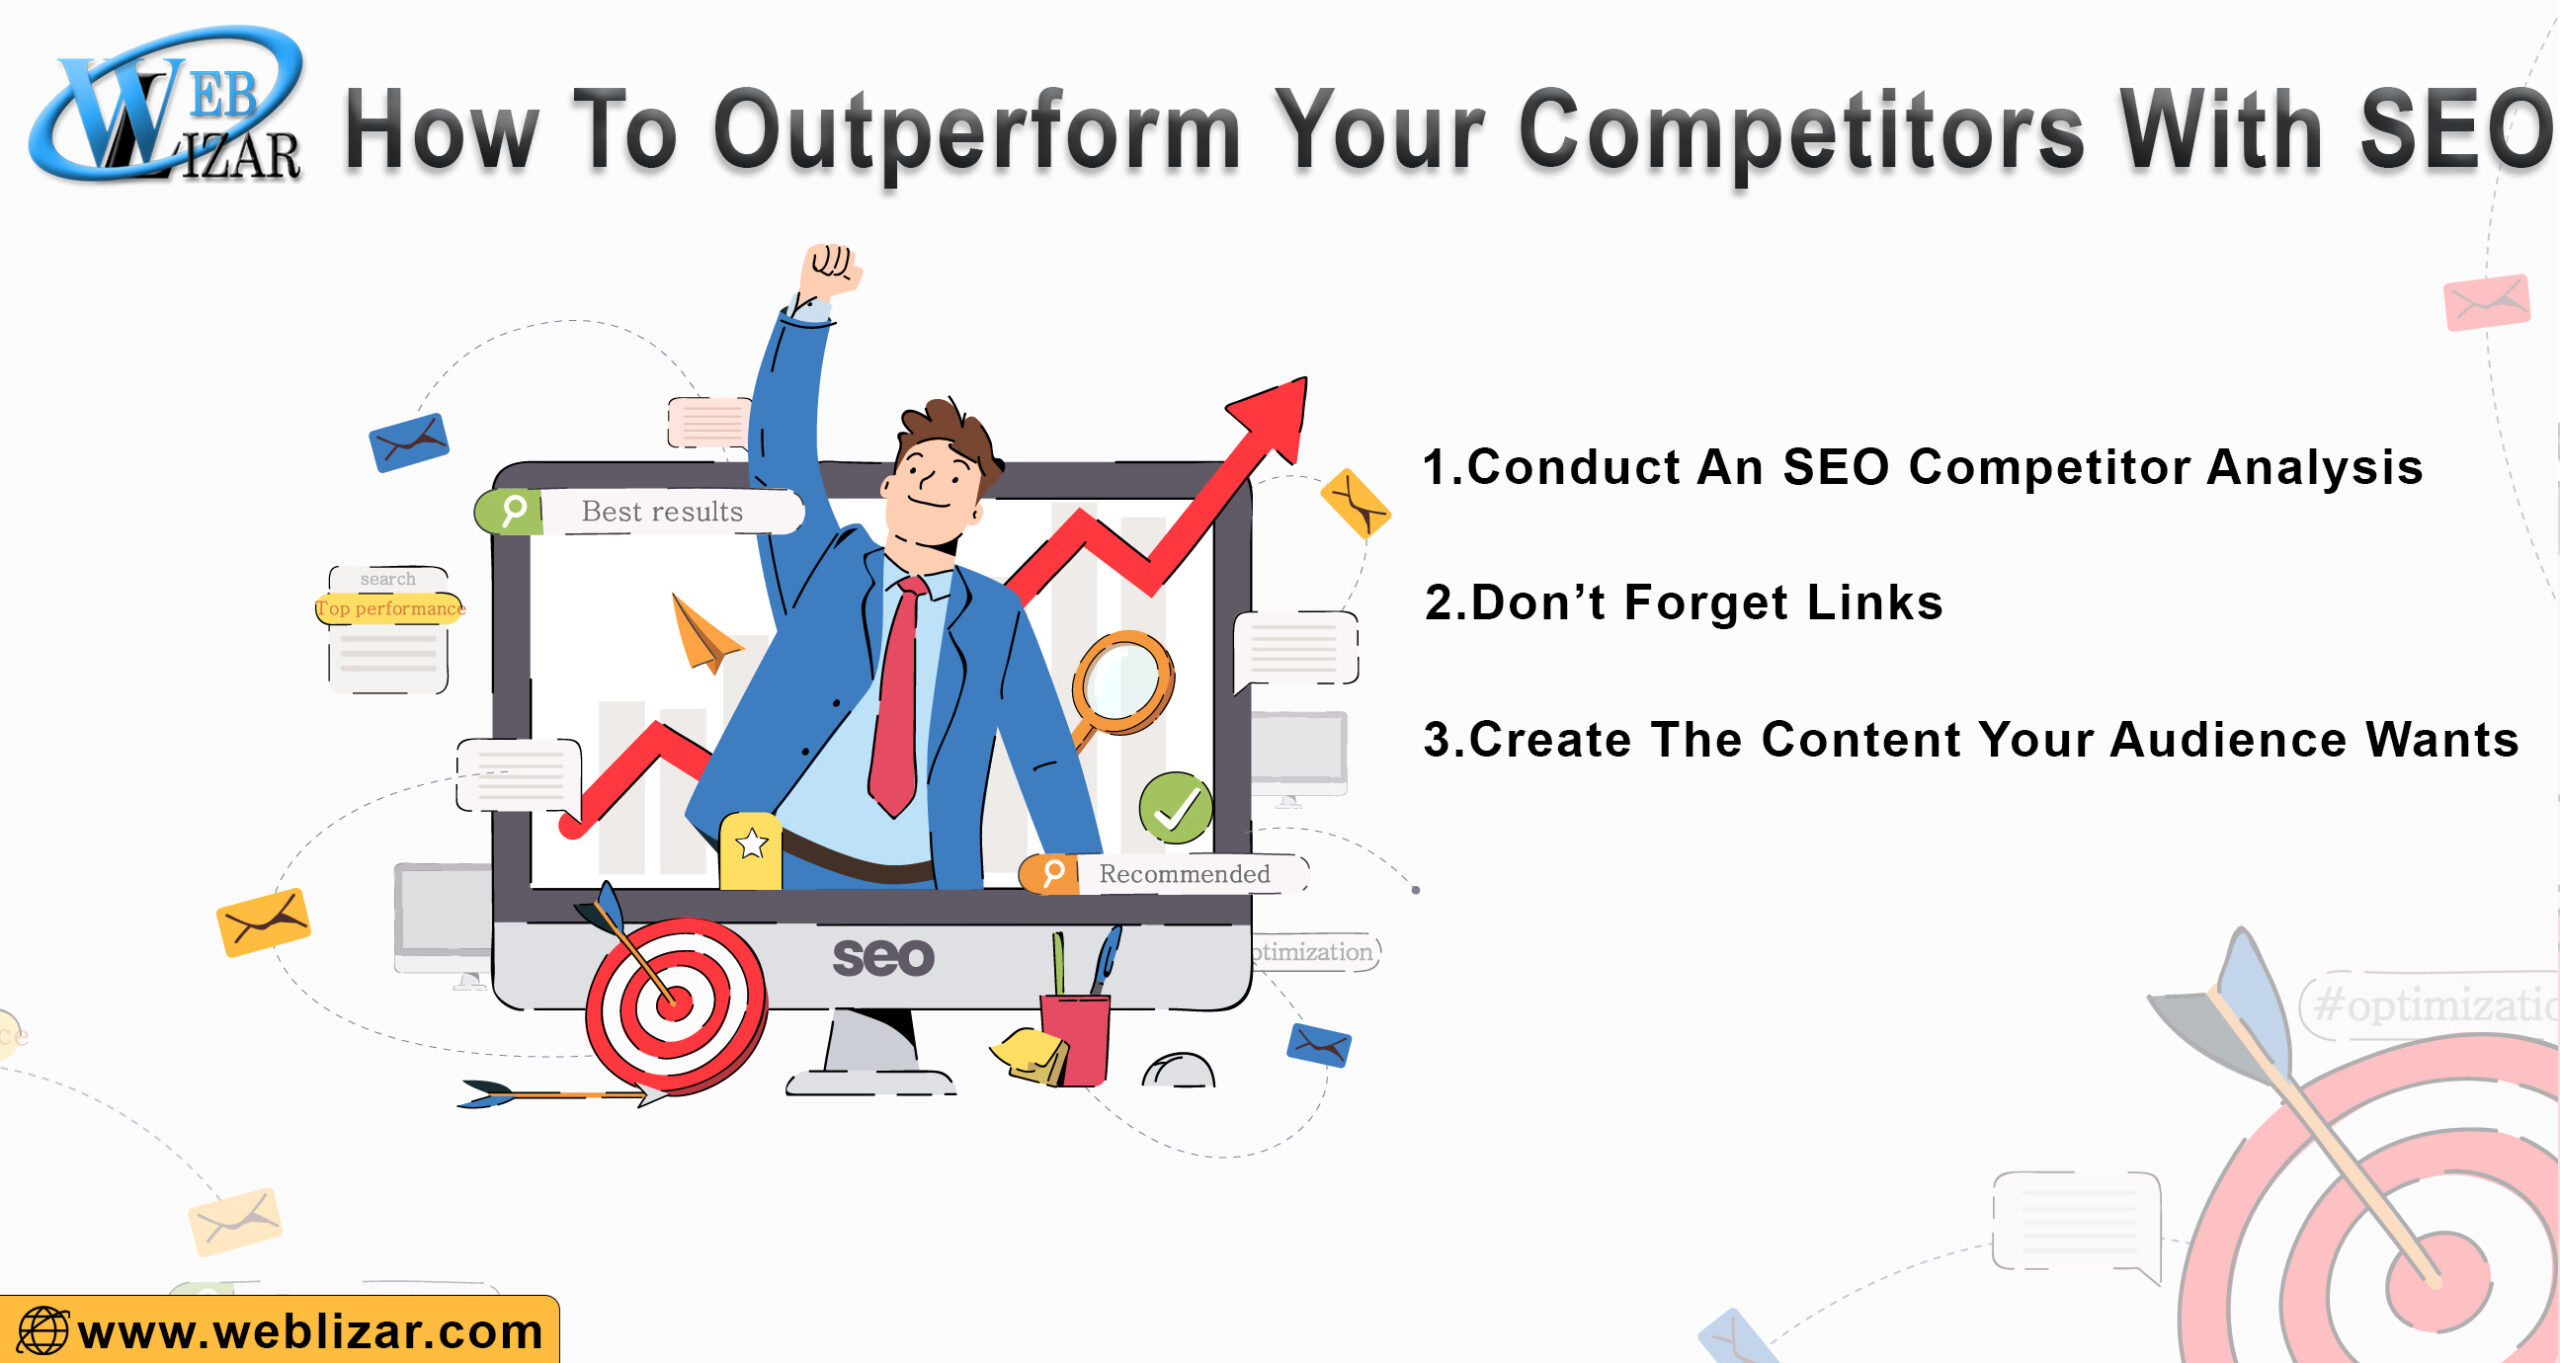 How-To-Outperform-Your-Competitors-With-SEO-scaled.jpg